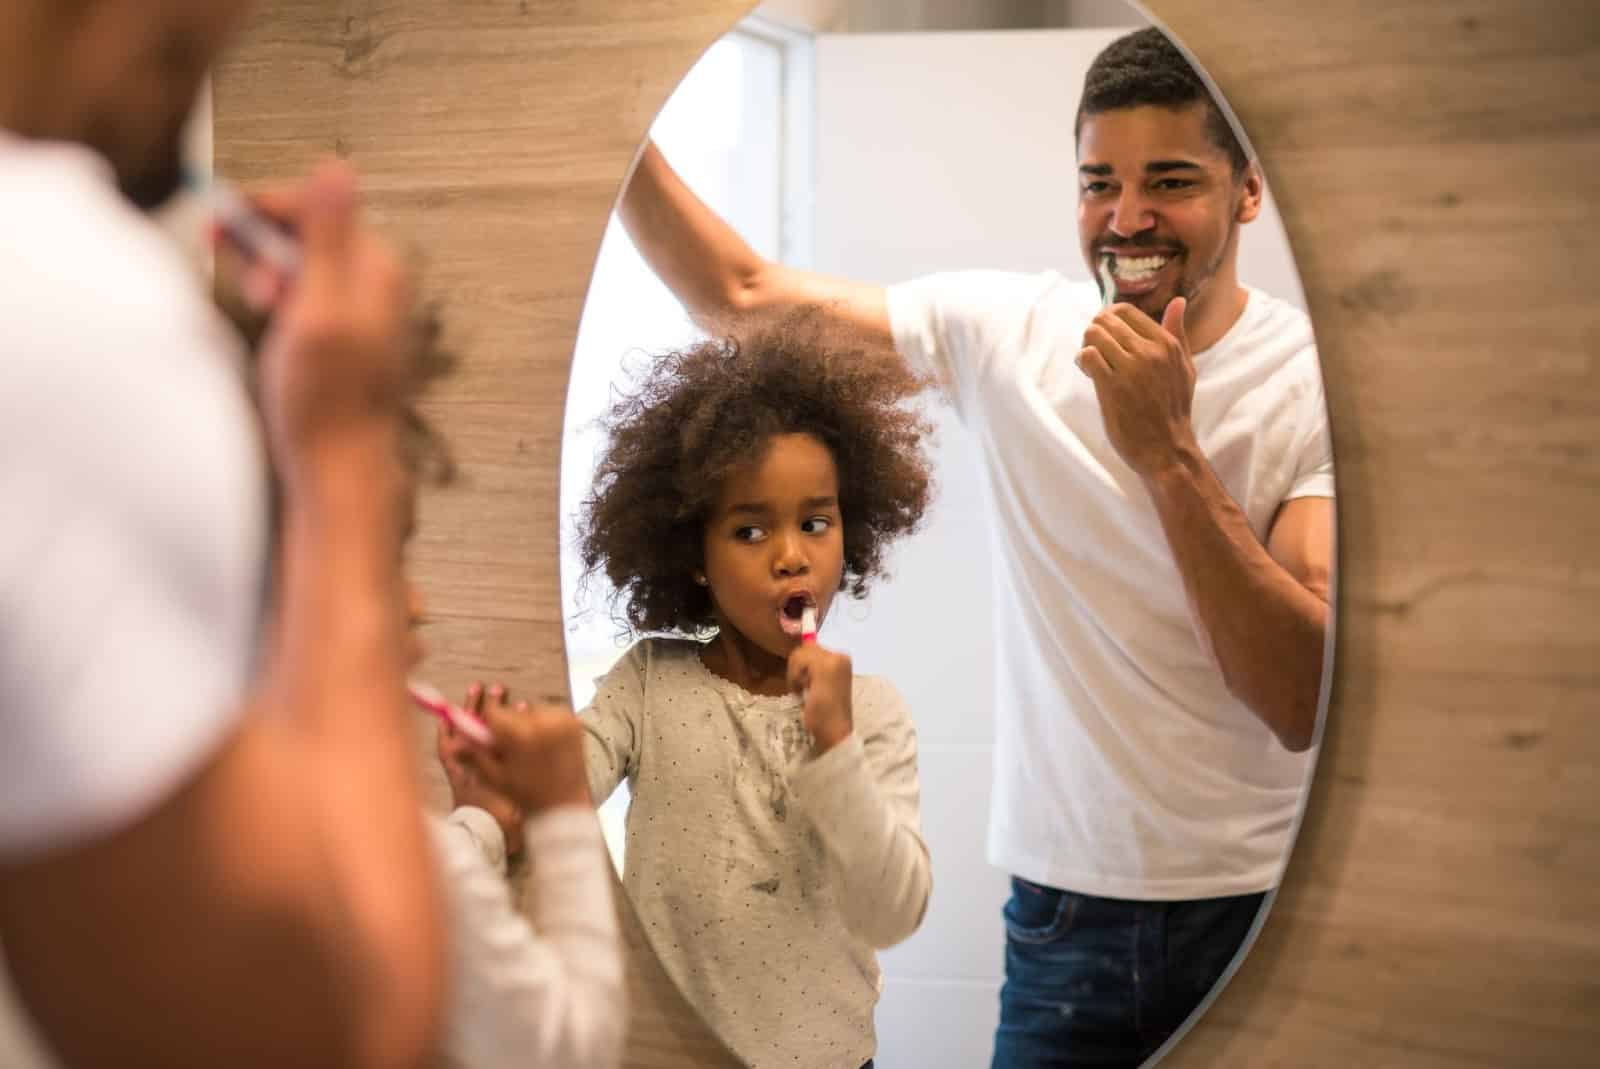 Cute little girl and handsome dad brushing teeth together in front of oval mirror